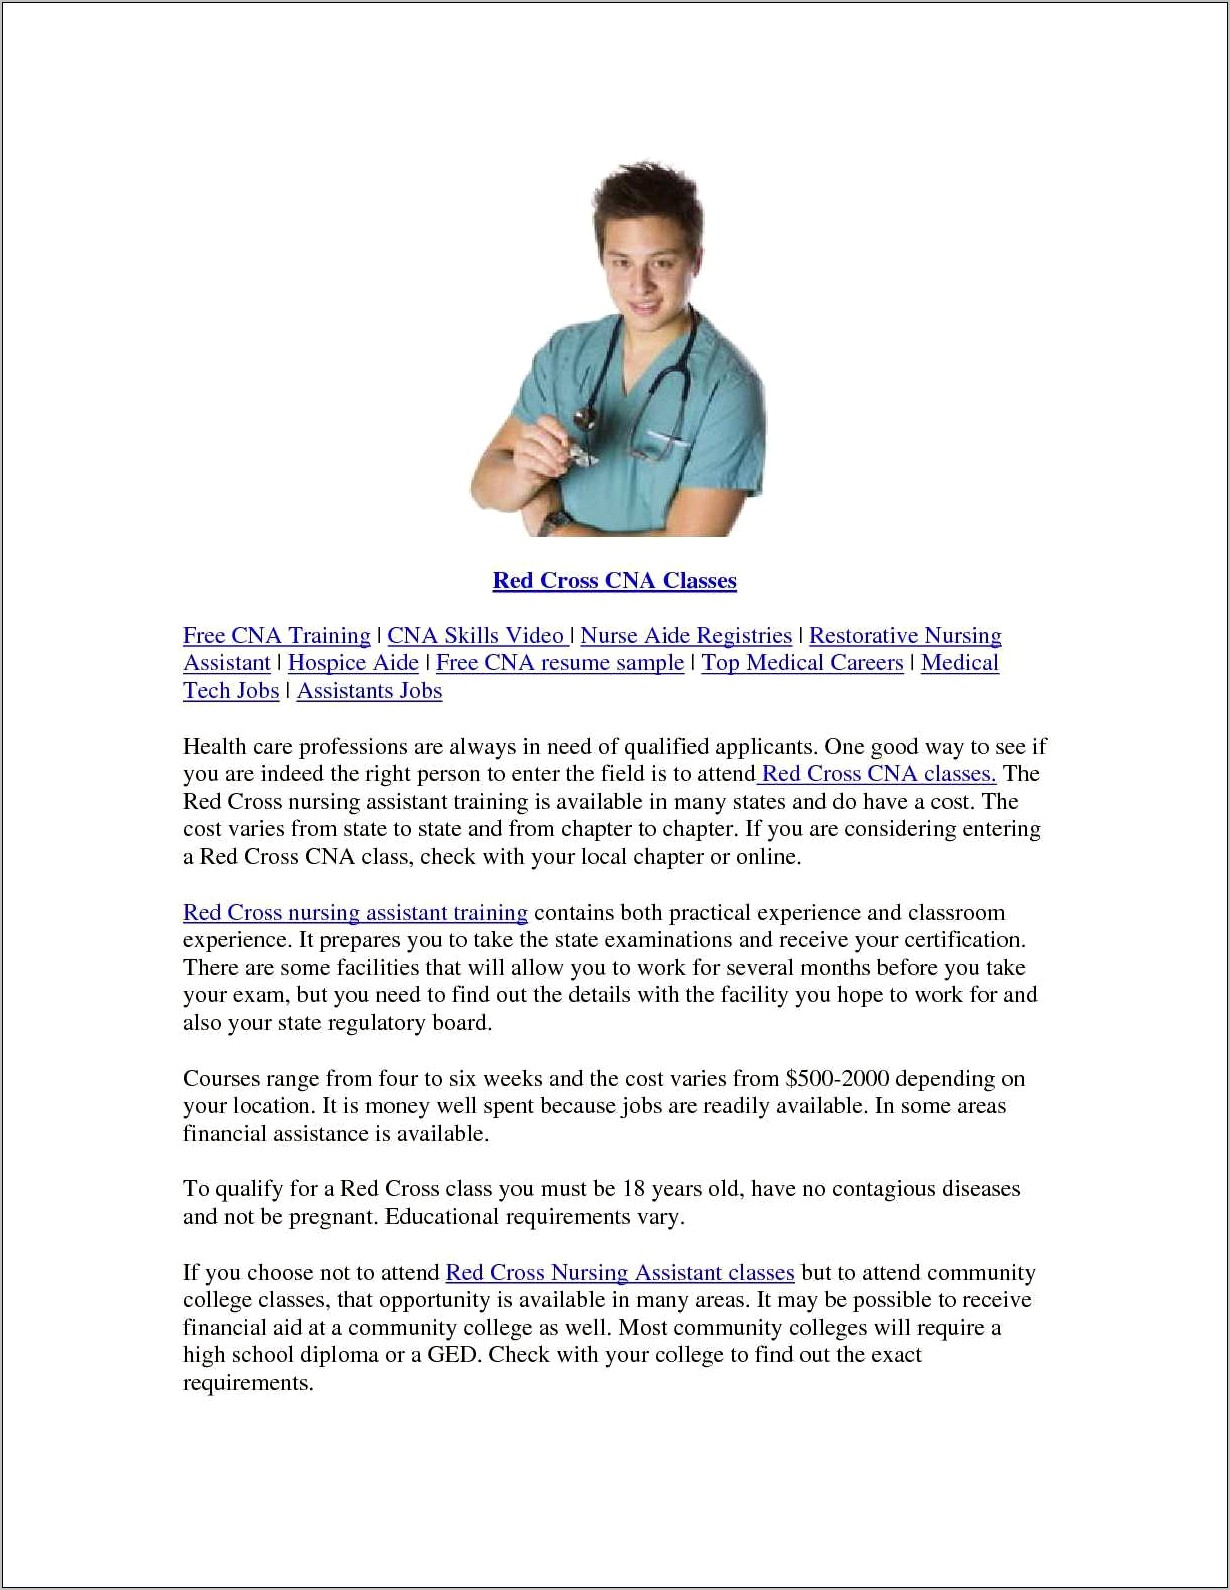 Nursing Assistant Skills And Qualifications For Resume